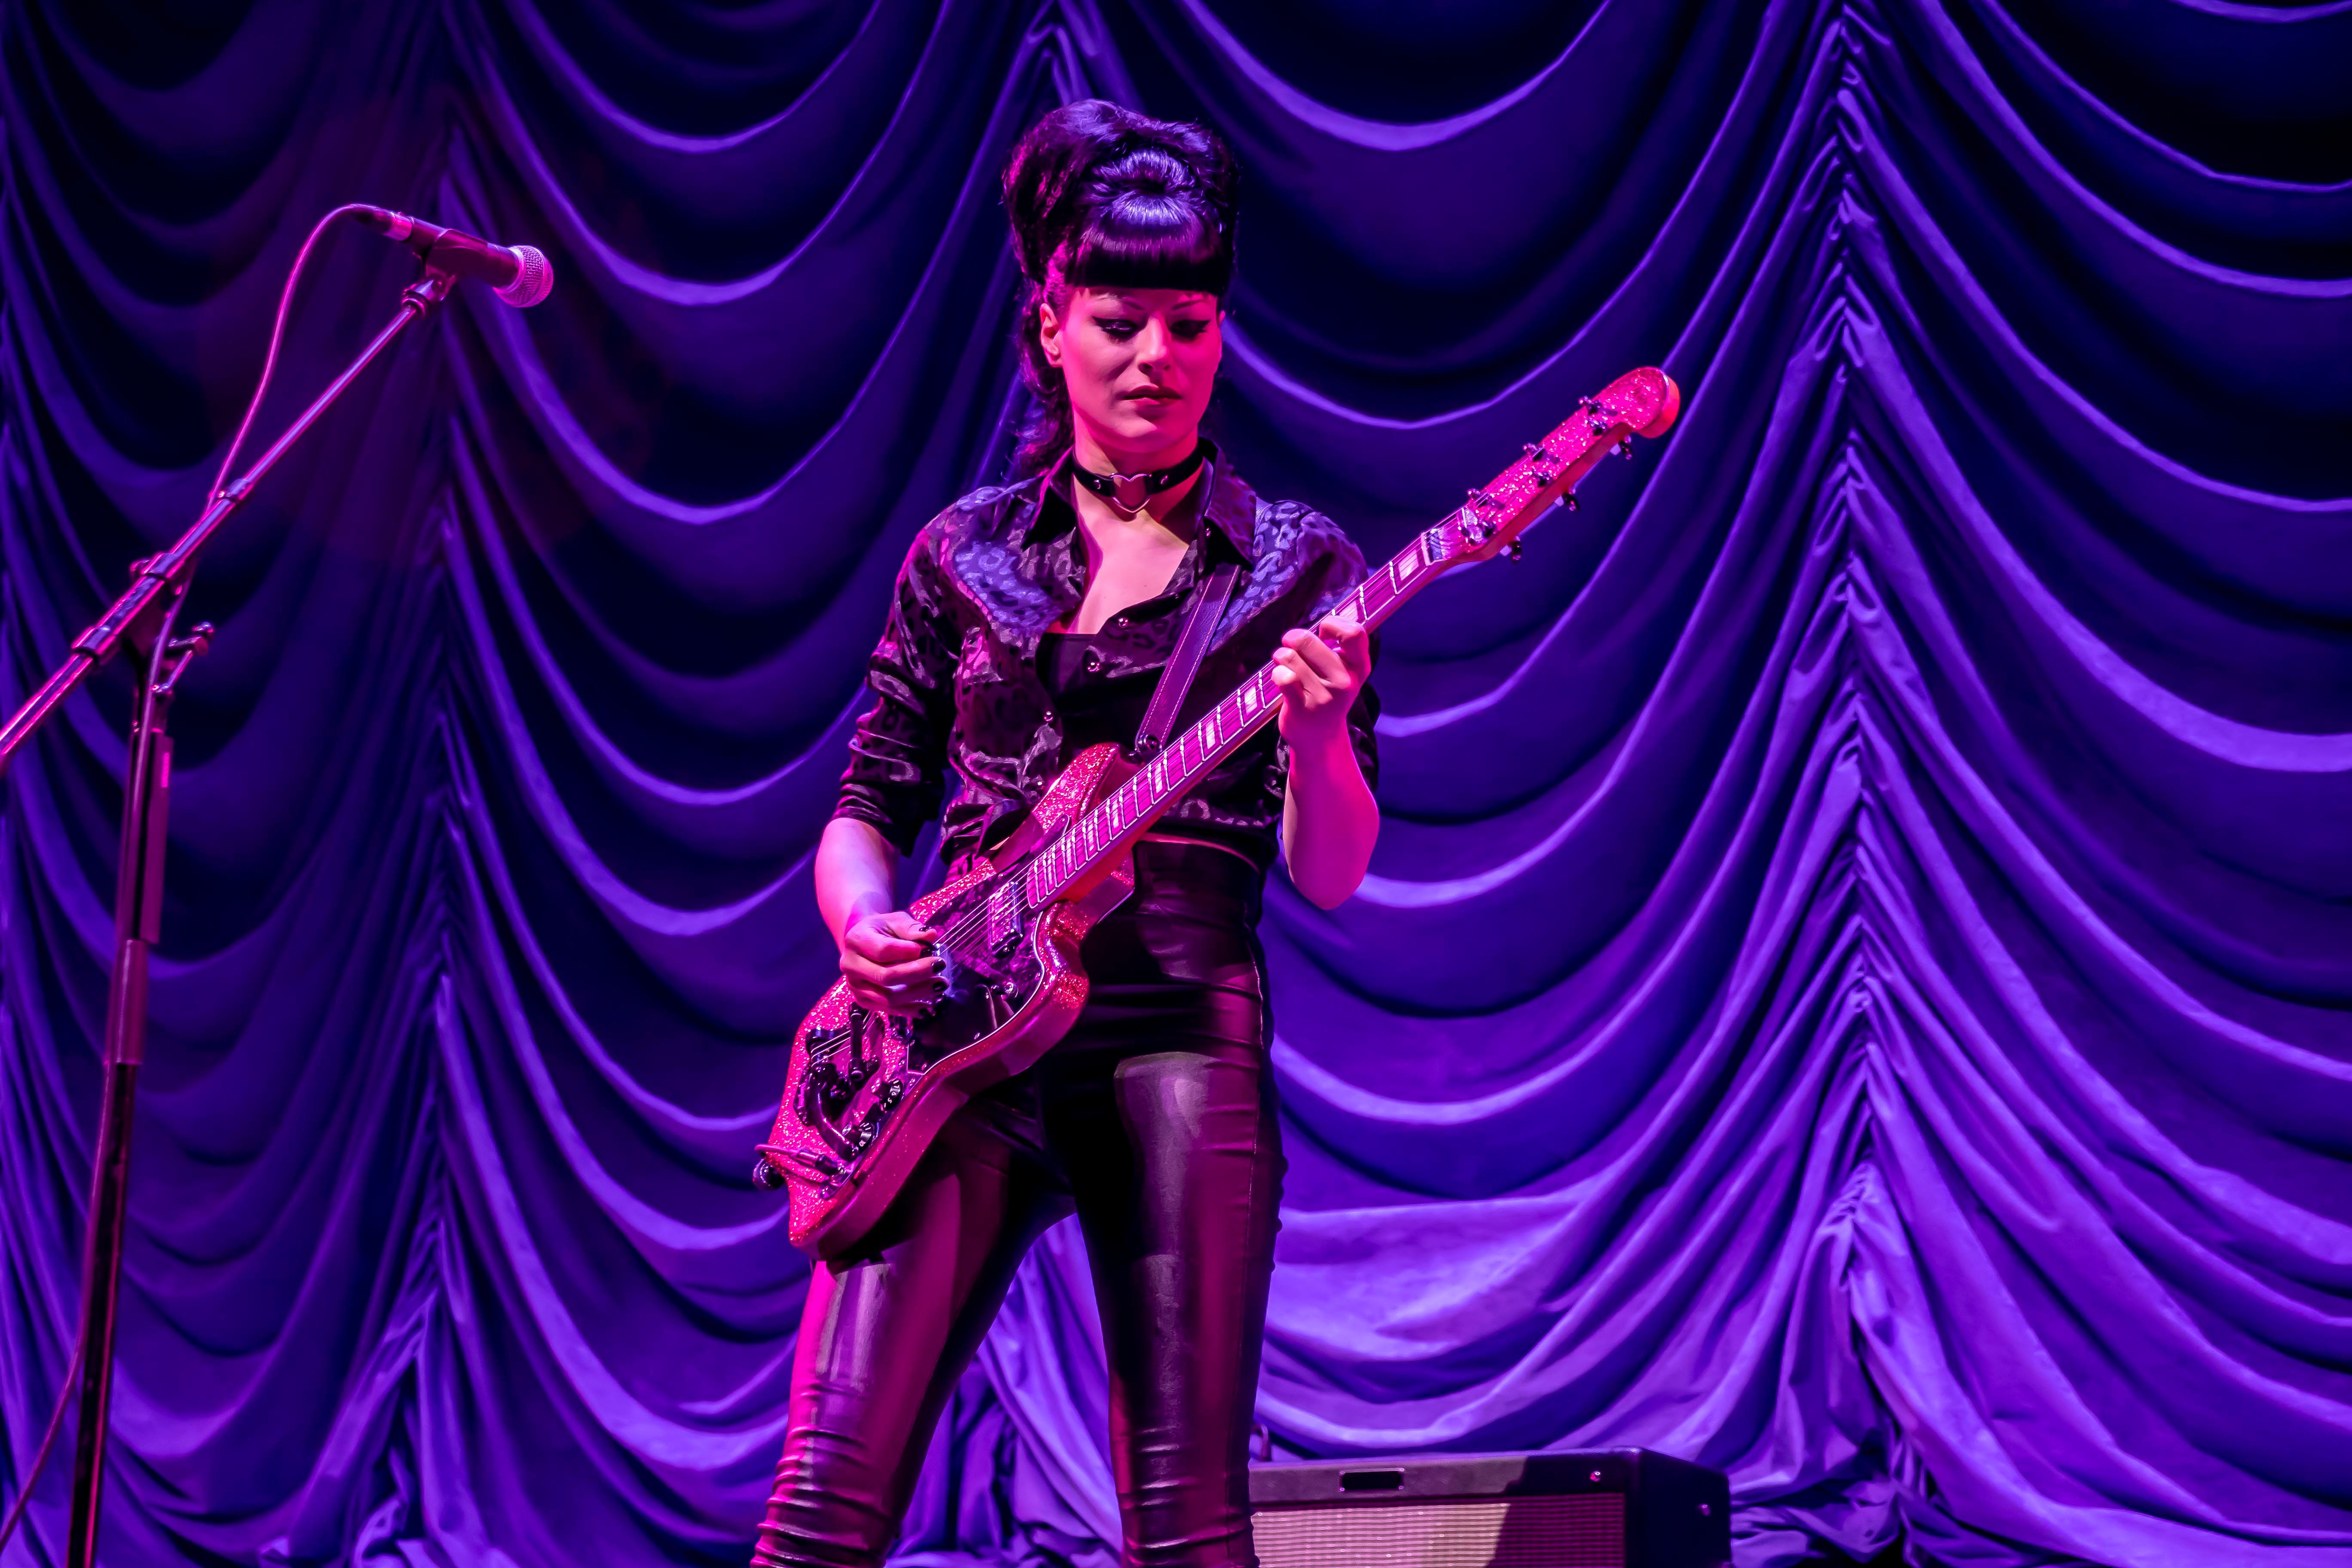 Olivia Jean performs at the historic Masonic Temple before Jack White’s new Supply Chains Issues Tour on April 8, 2022 in Detroit, Michigan. (Photo by Dave Reginek-Special to The Detroit News)